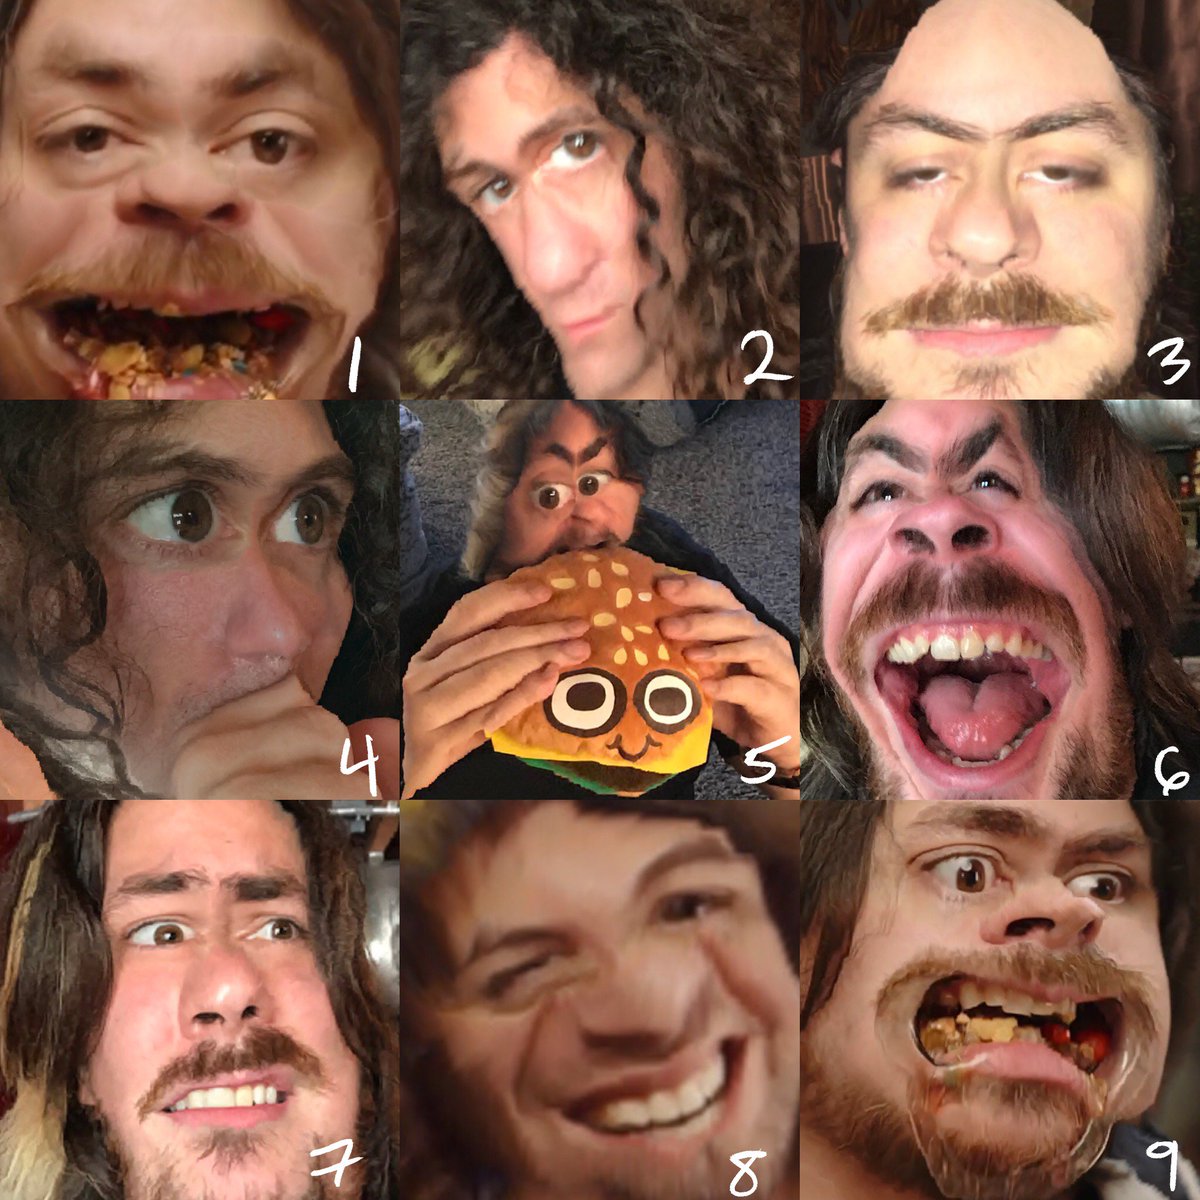 game-grumps-on-twitter-which-mood-are-you-today-https-t-co-fnpsqjucwt-twitter